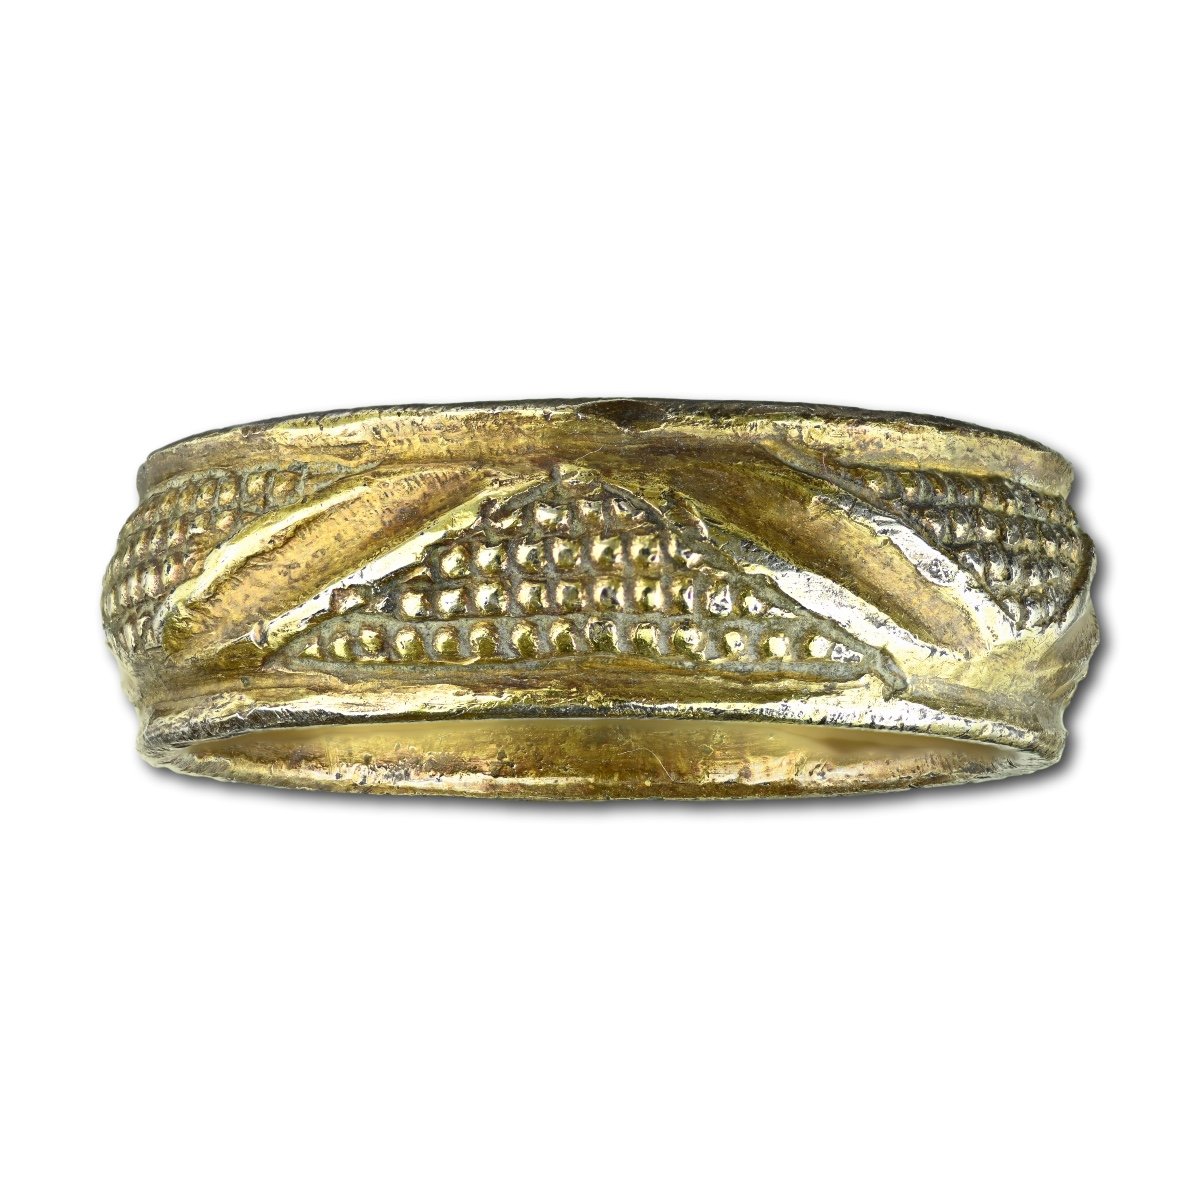 A Medieval Silver Gilt Ring. English, 15th / 16th Century.